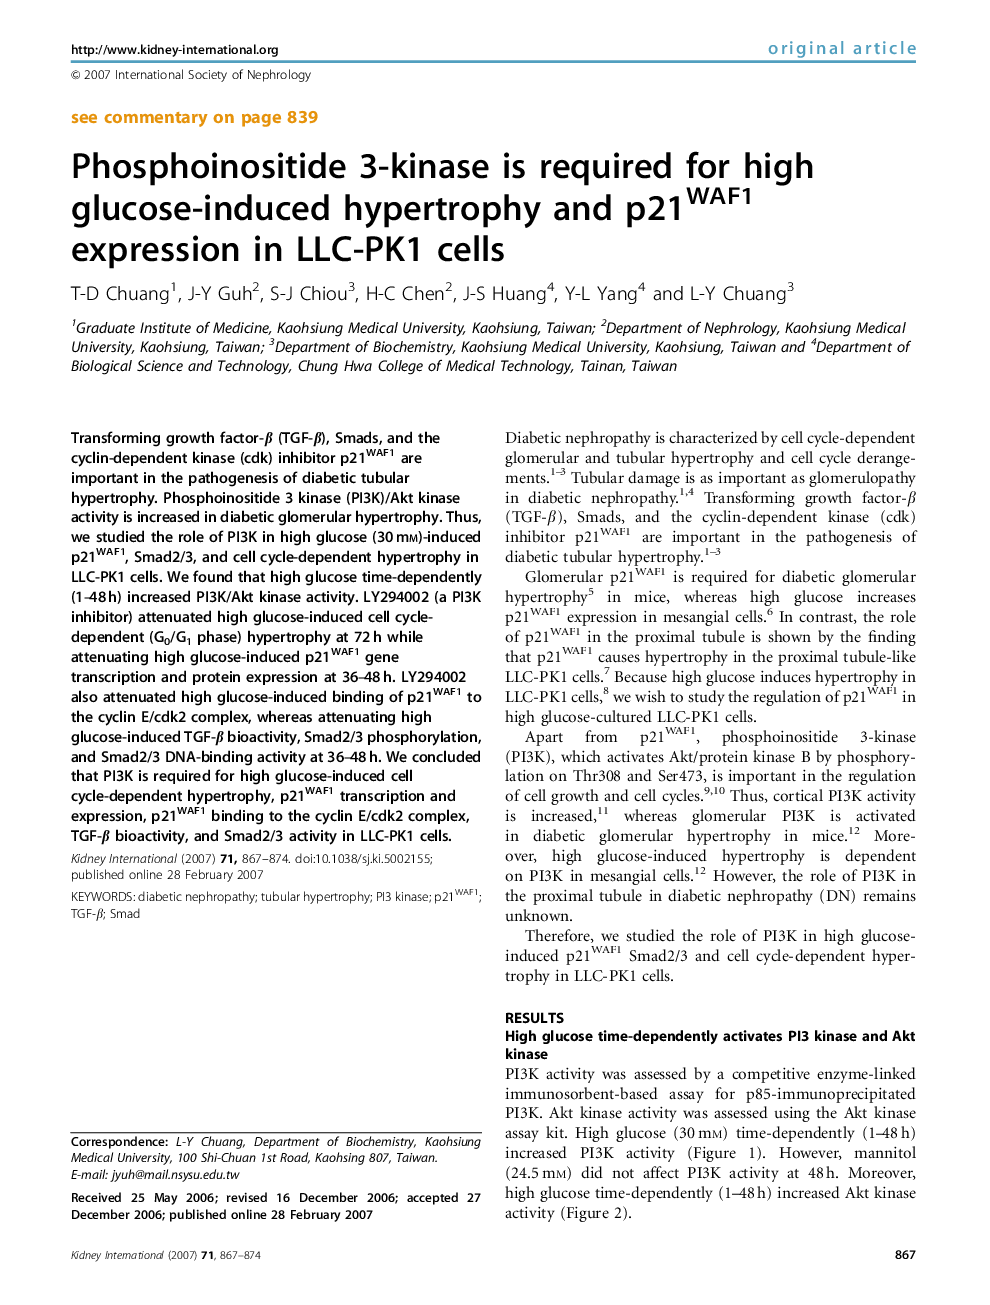 Phosphoinositide 3-kinase is required for high glucose-induced hypertrophy and p21WAF1 expression in LLC-PK1 cells